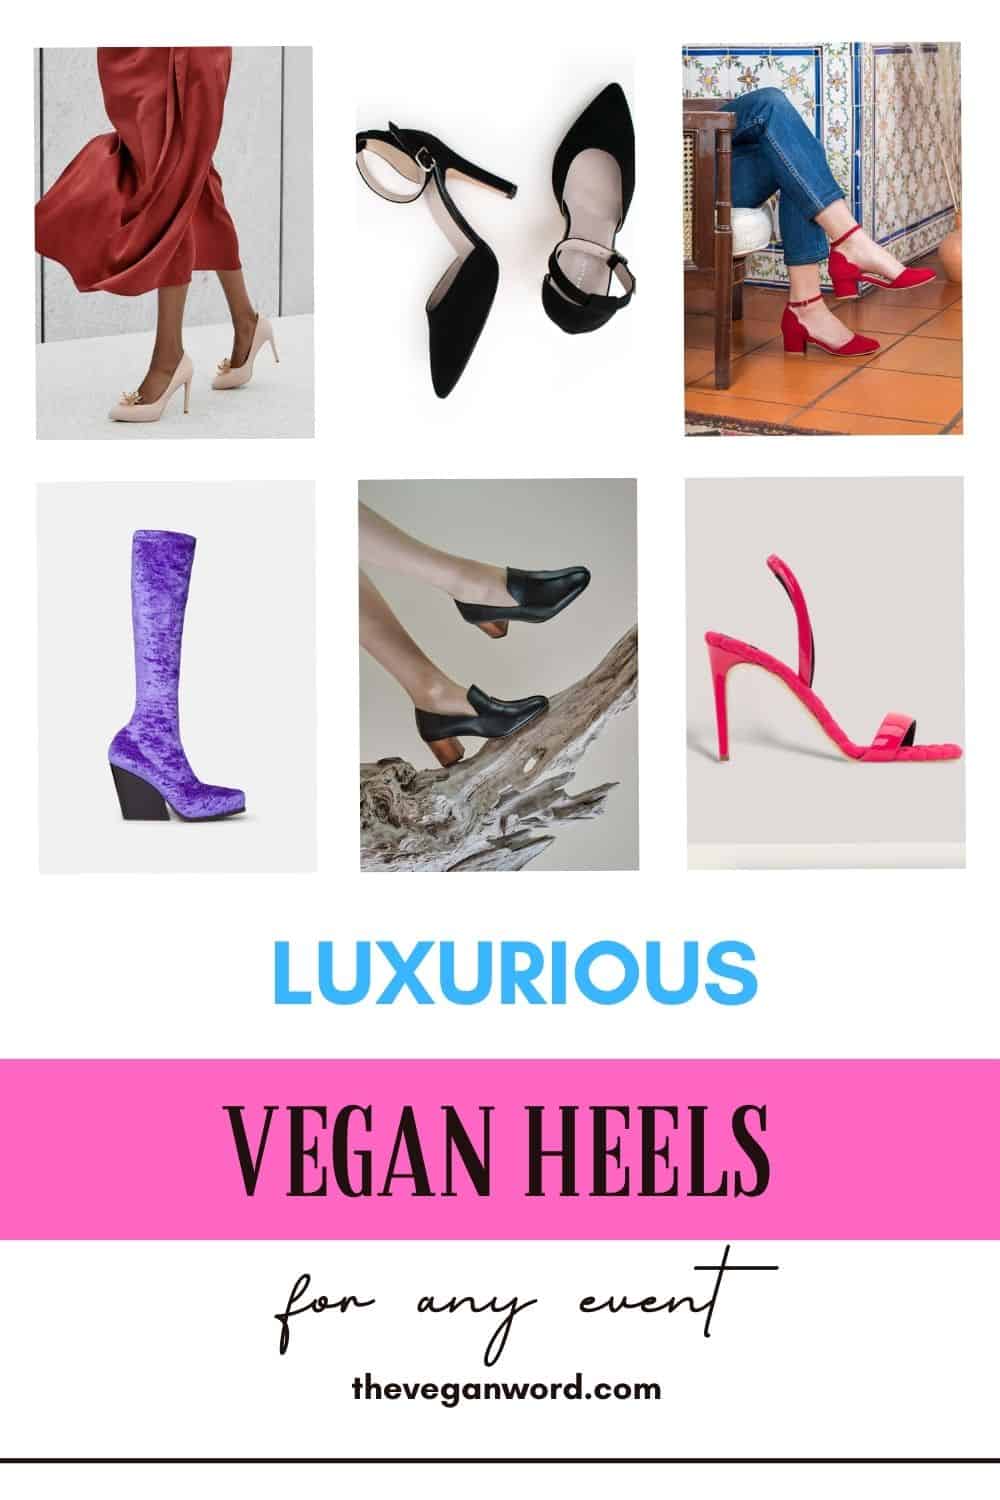 Pinterest image of different sandal styles with text that reads "luxurious vegan heels for any event"